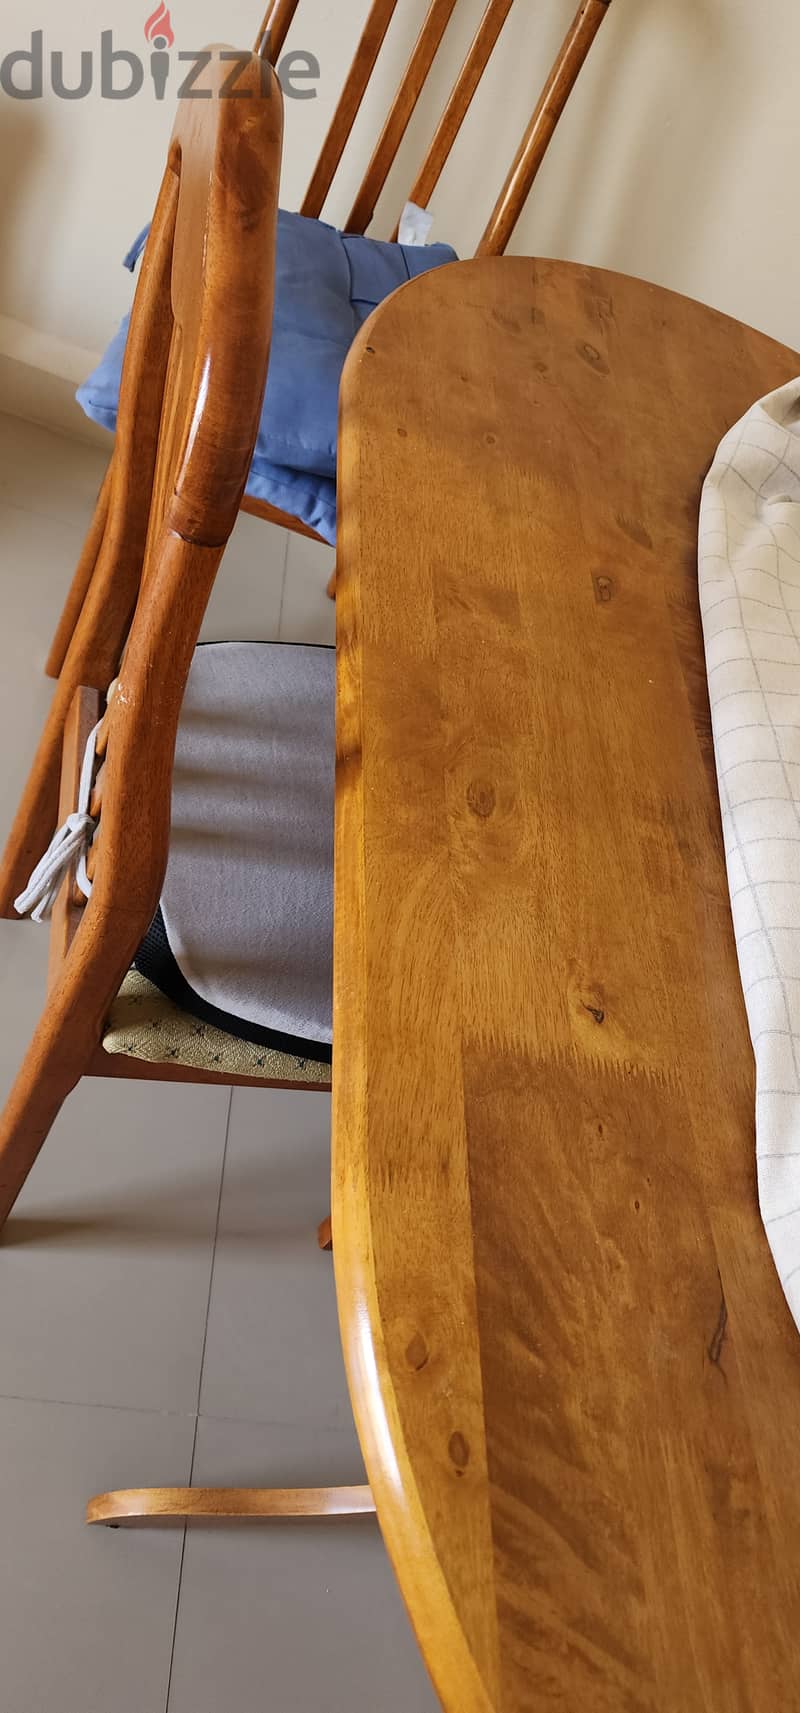 Dining table with Chairs, Good condition 1